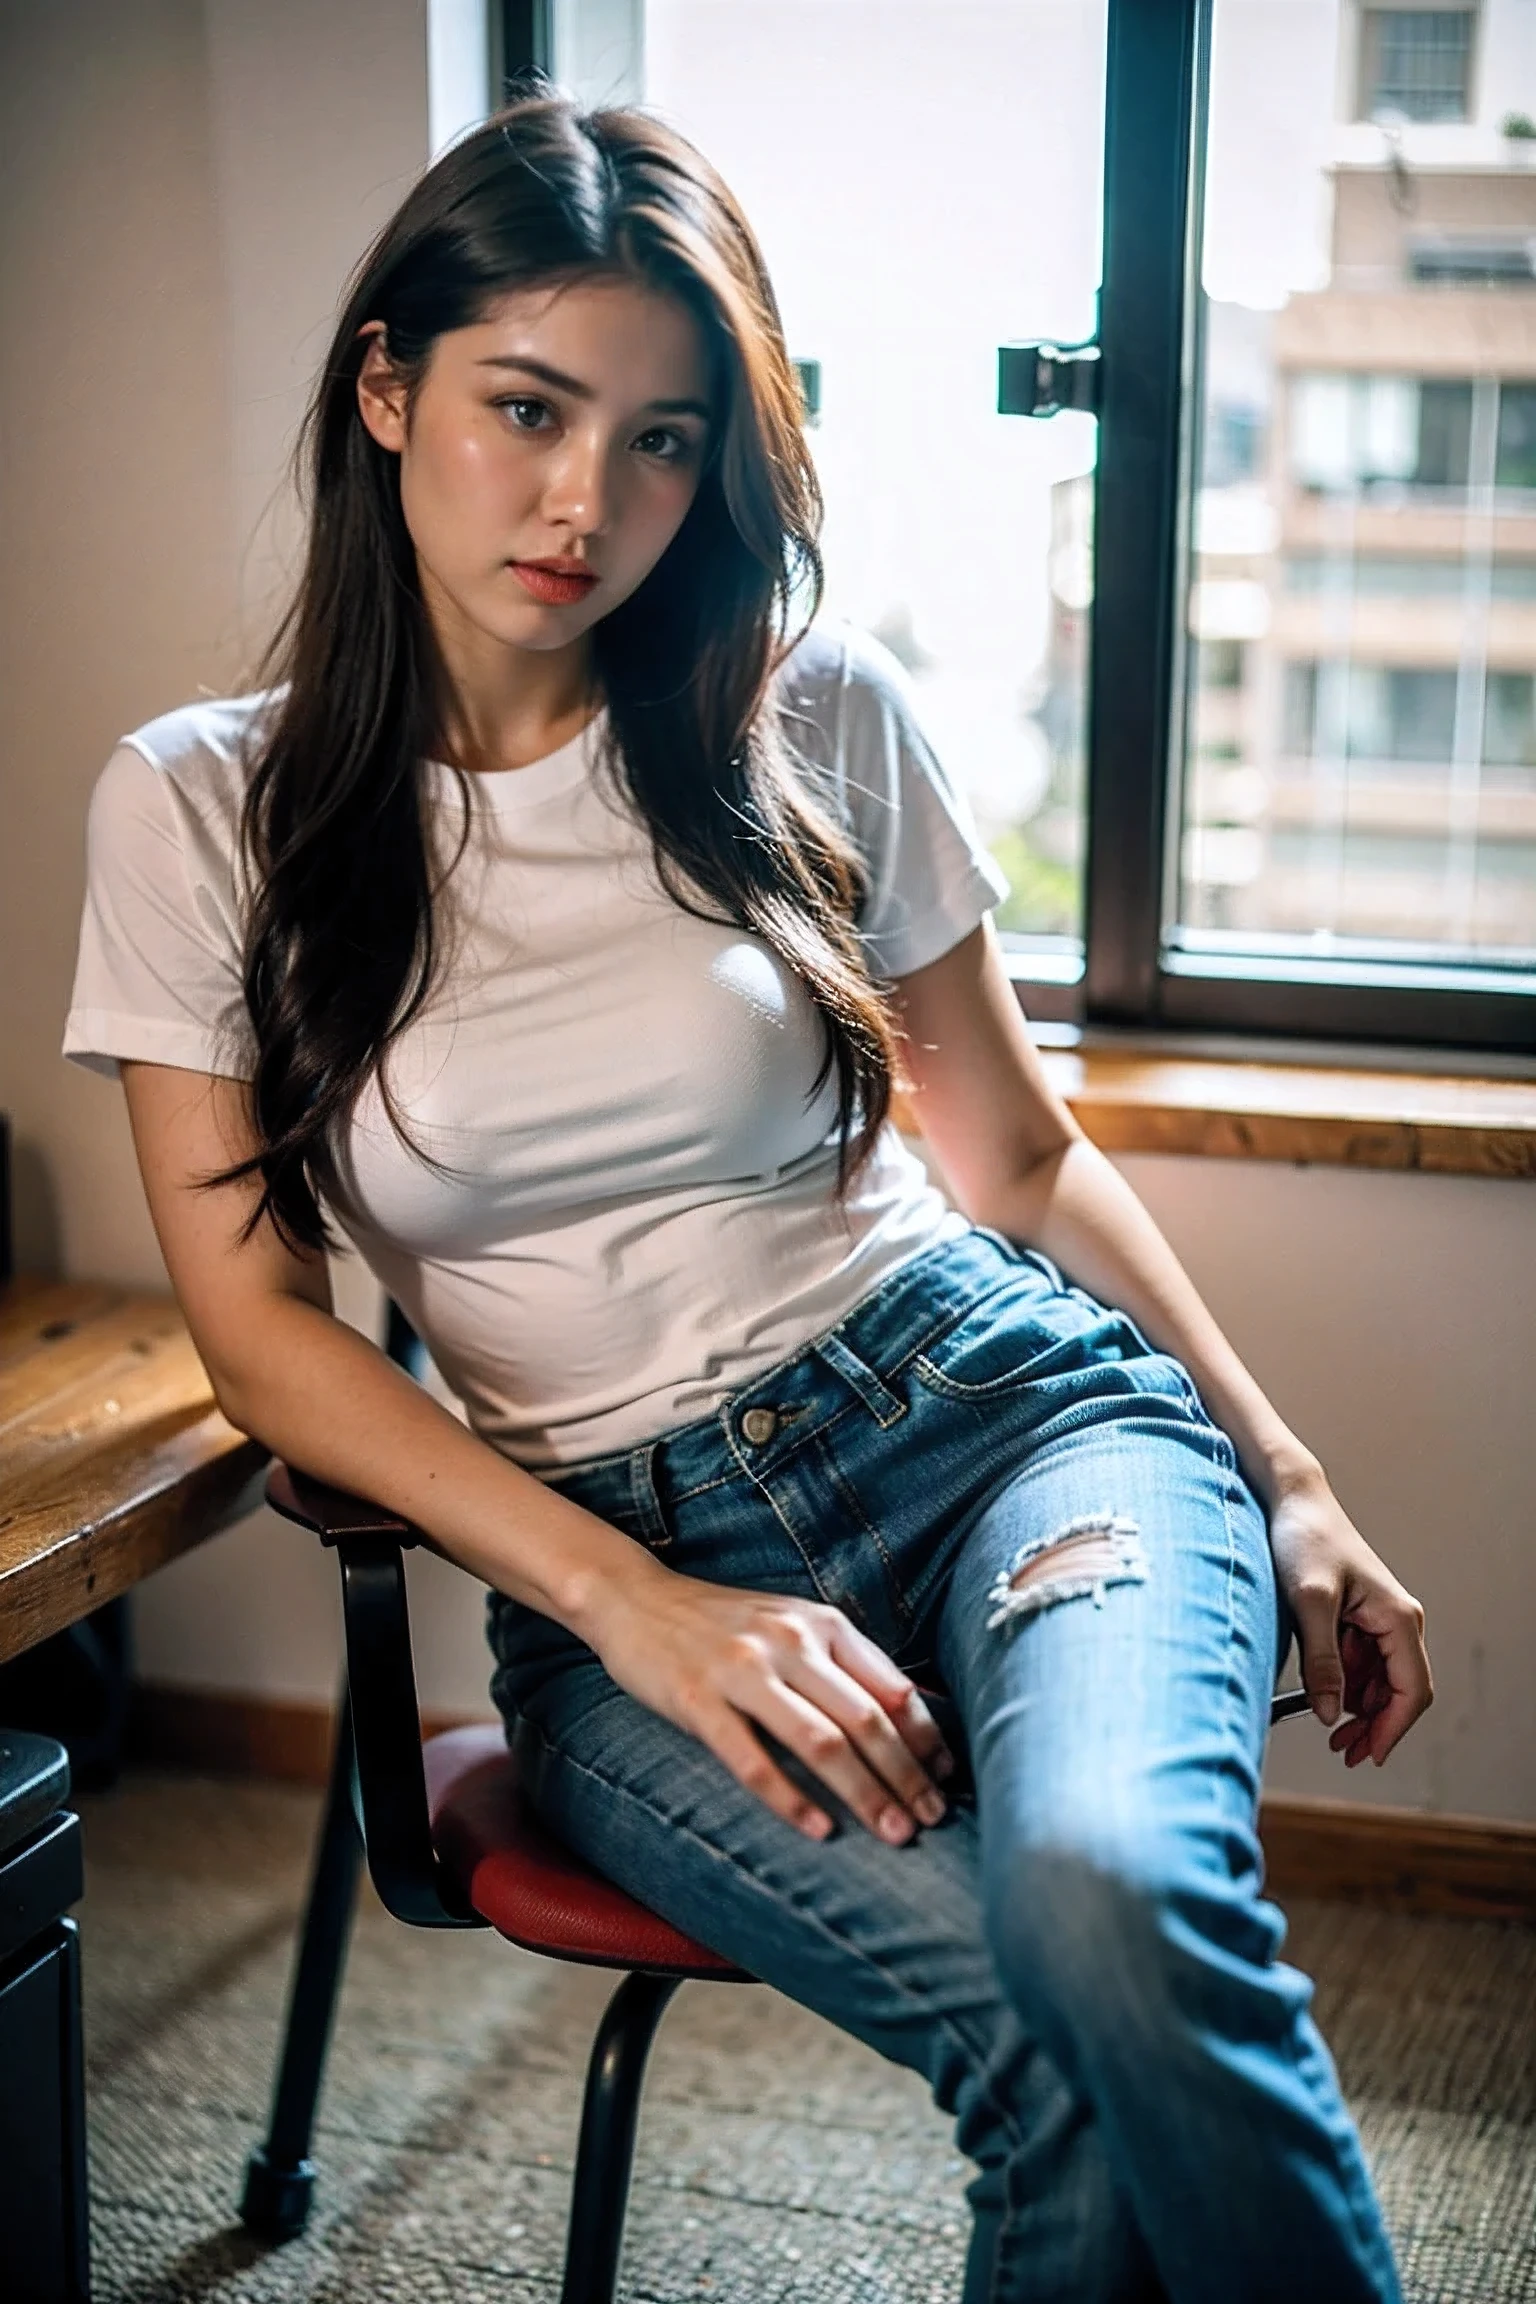 Realistic photography, long hair woman , t-shirt, jeans, office room